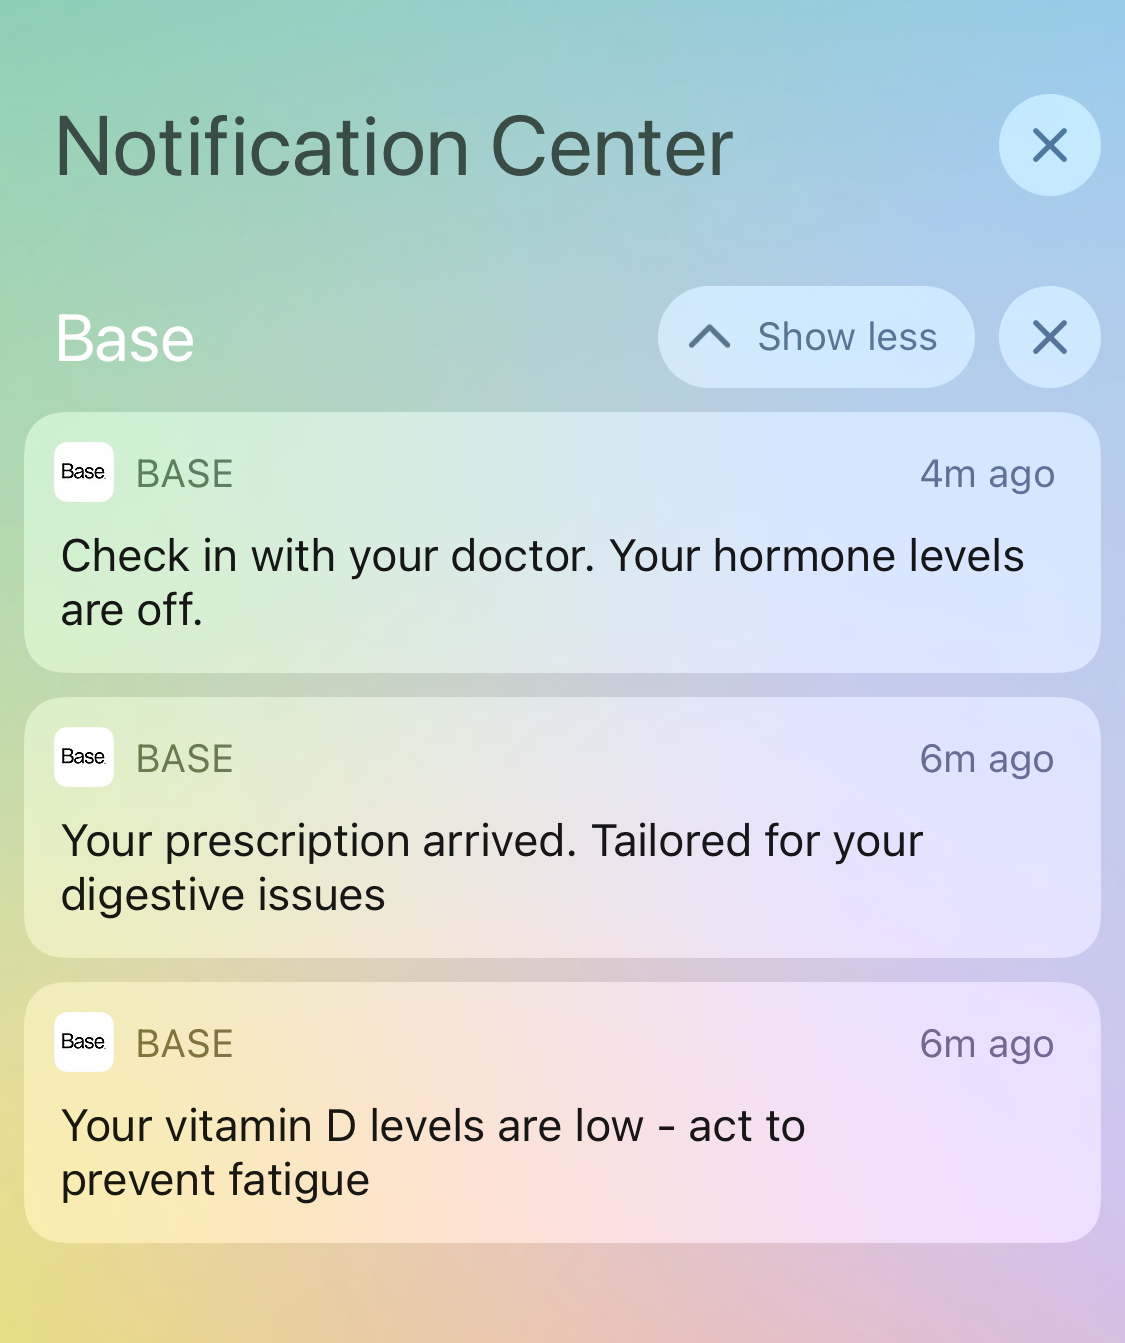 Notifications for personalized health care